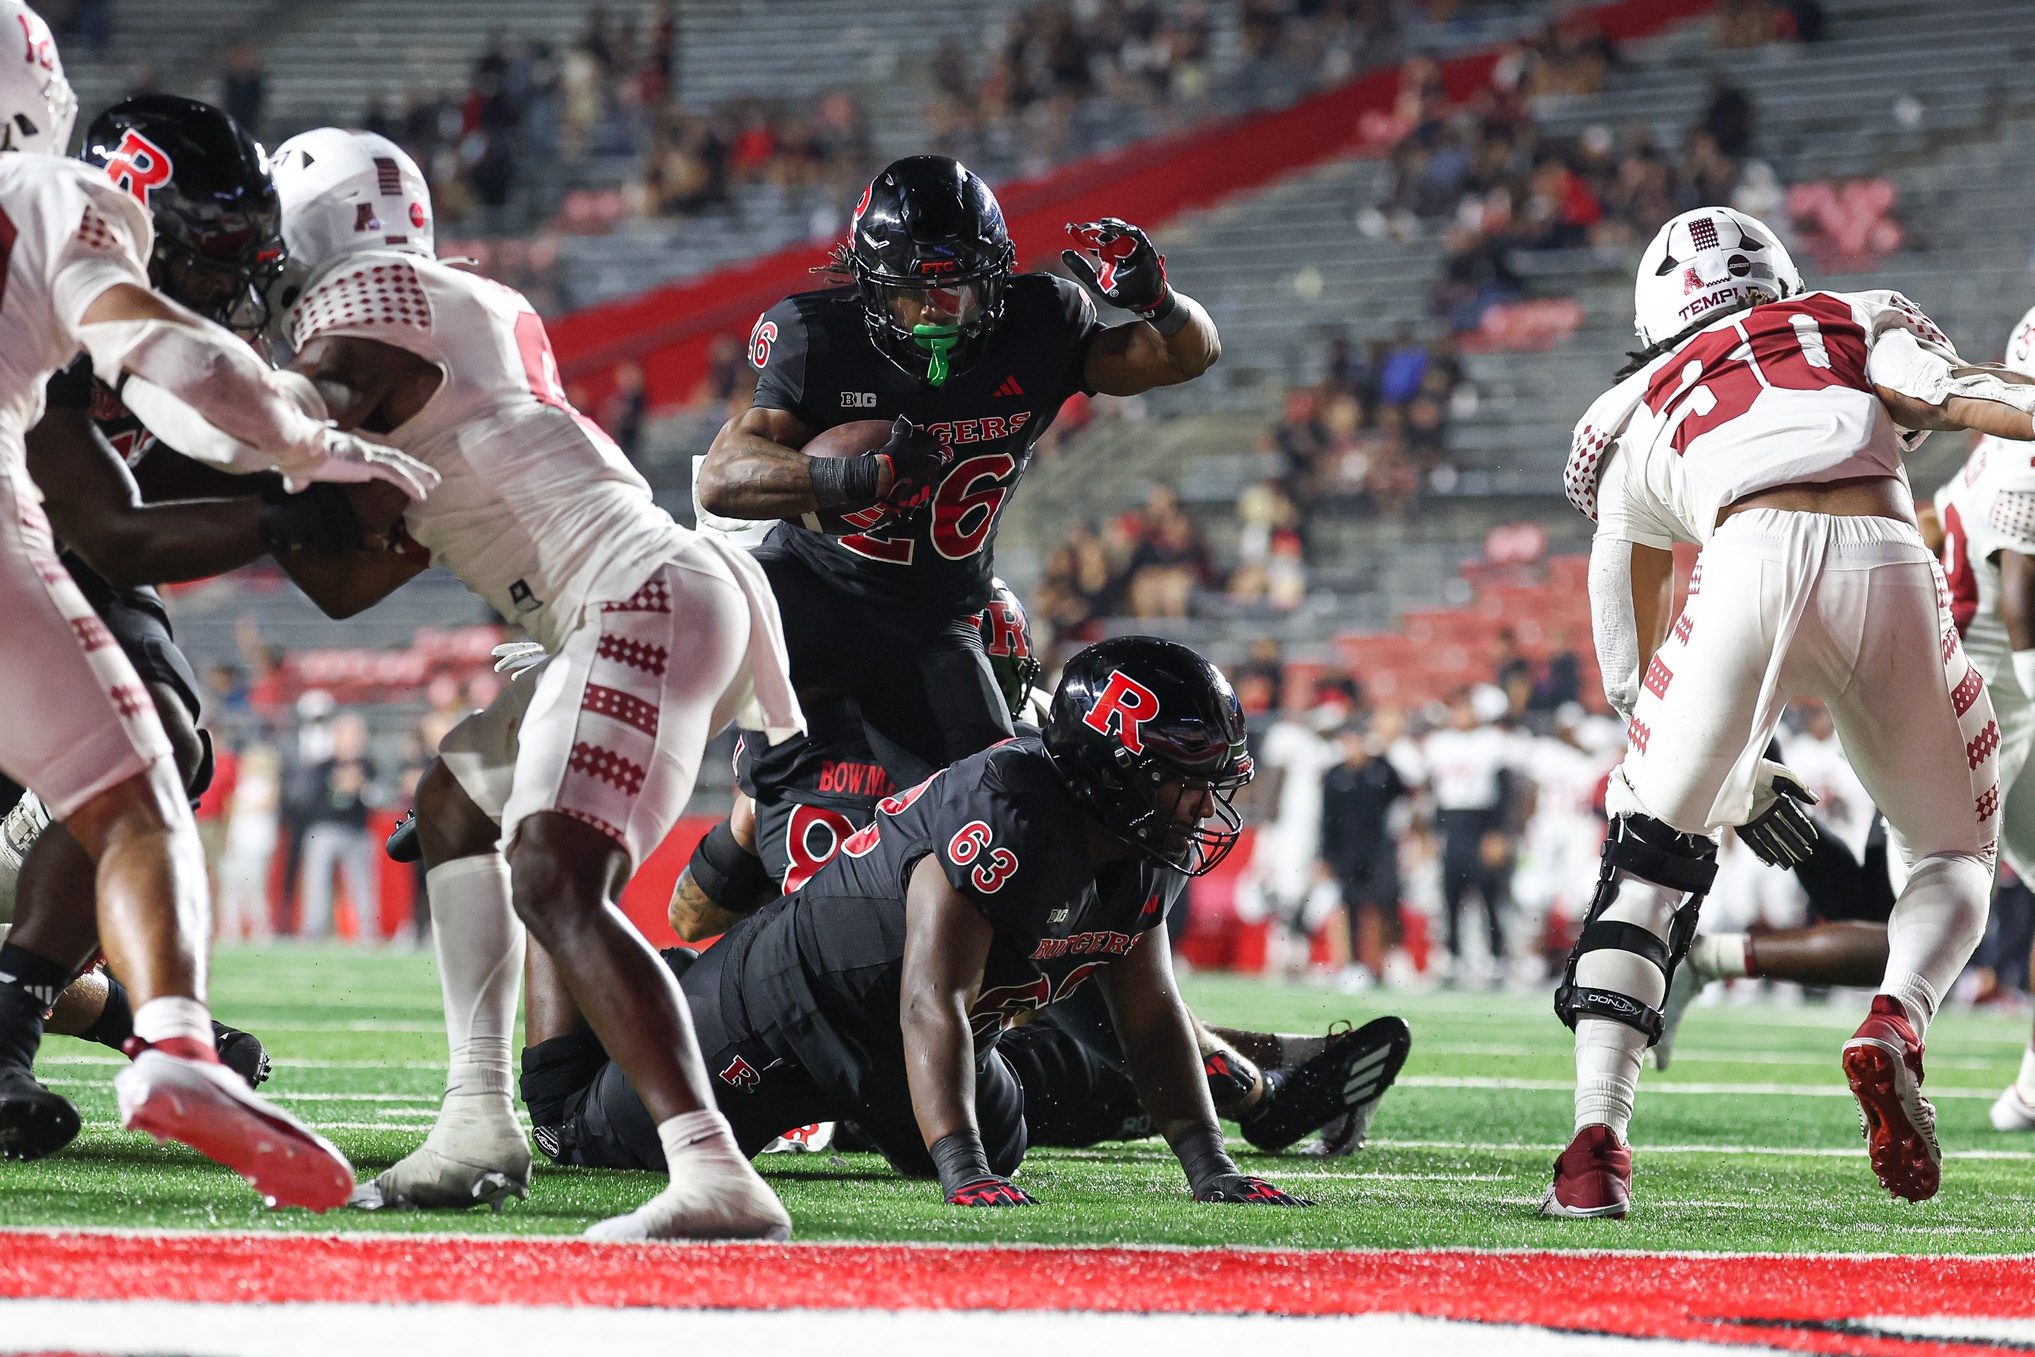 Rutgers Showing Growth at 2-0